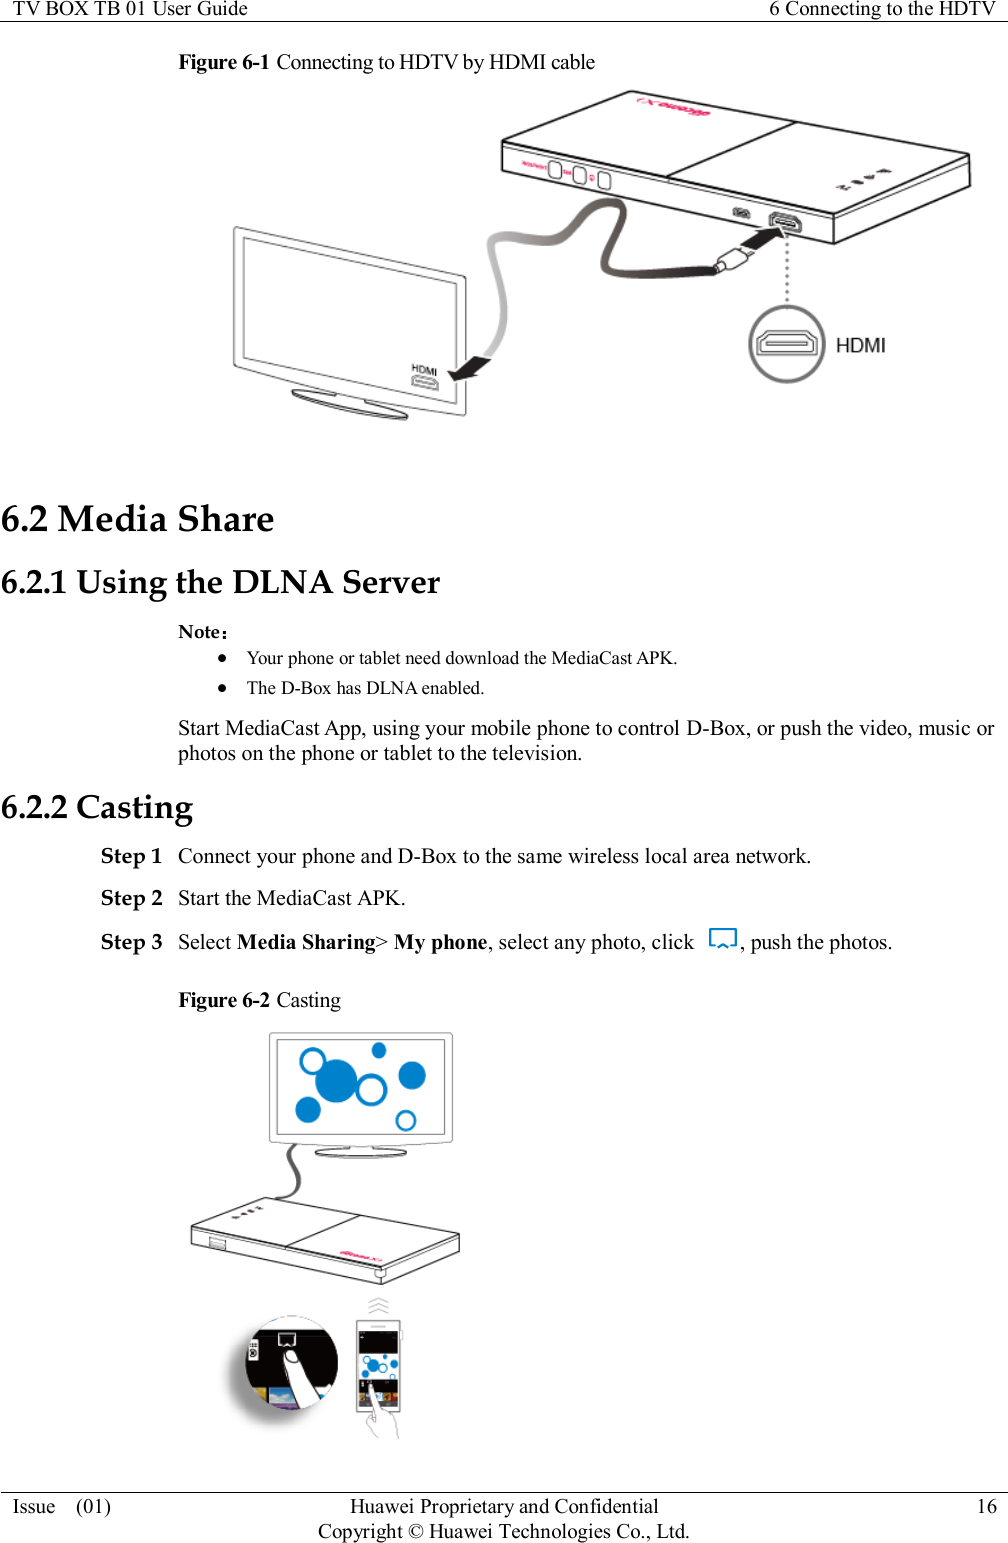 TV BOX TB 01 User Guide 6 Connecting to the HDTV  Issue    (01) Huawei Proprietary and Confidential                                     Copyright © Huawei Technologies Co., Ltd. 16  Figure 6-1 Connecting to HDTV by HDMI cable  6.2 Media Share 6.2.1 Using the DLNA Server Note：  Your phone or tablet need download the MediaCast APK.  The D-Box has DLNA enabled. Start MediaCast App, using your mobile phone to control D-Box, or push the video, music or photos on the phone or tablet to the television. 6.2.2 Casting Step 1 Connect your phone and D-Box to the same wireless local area network. Step 2 Start the MediaCast APK. Step 3 Select Media Sharing&gt; My phone, select any photo, click  , push the photos. Figure 6-2 Casting  